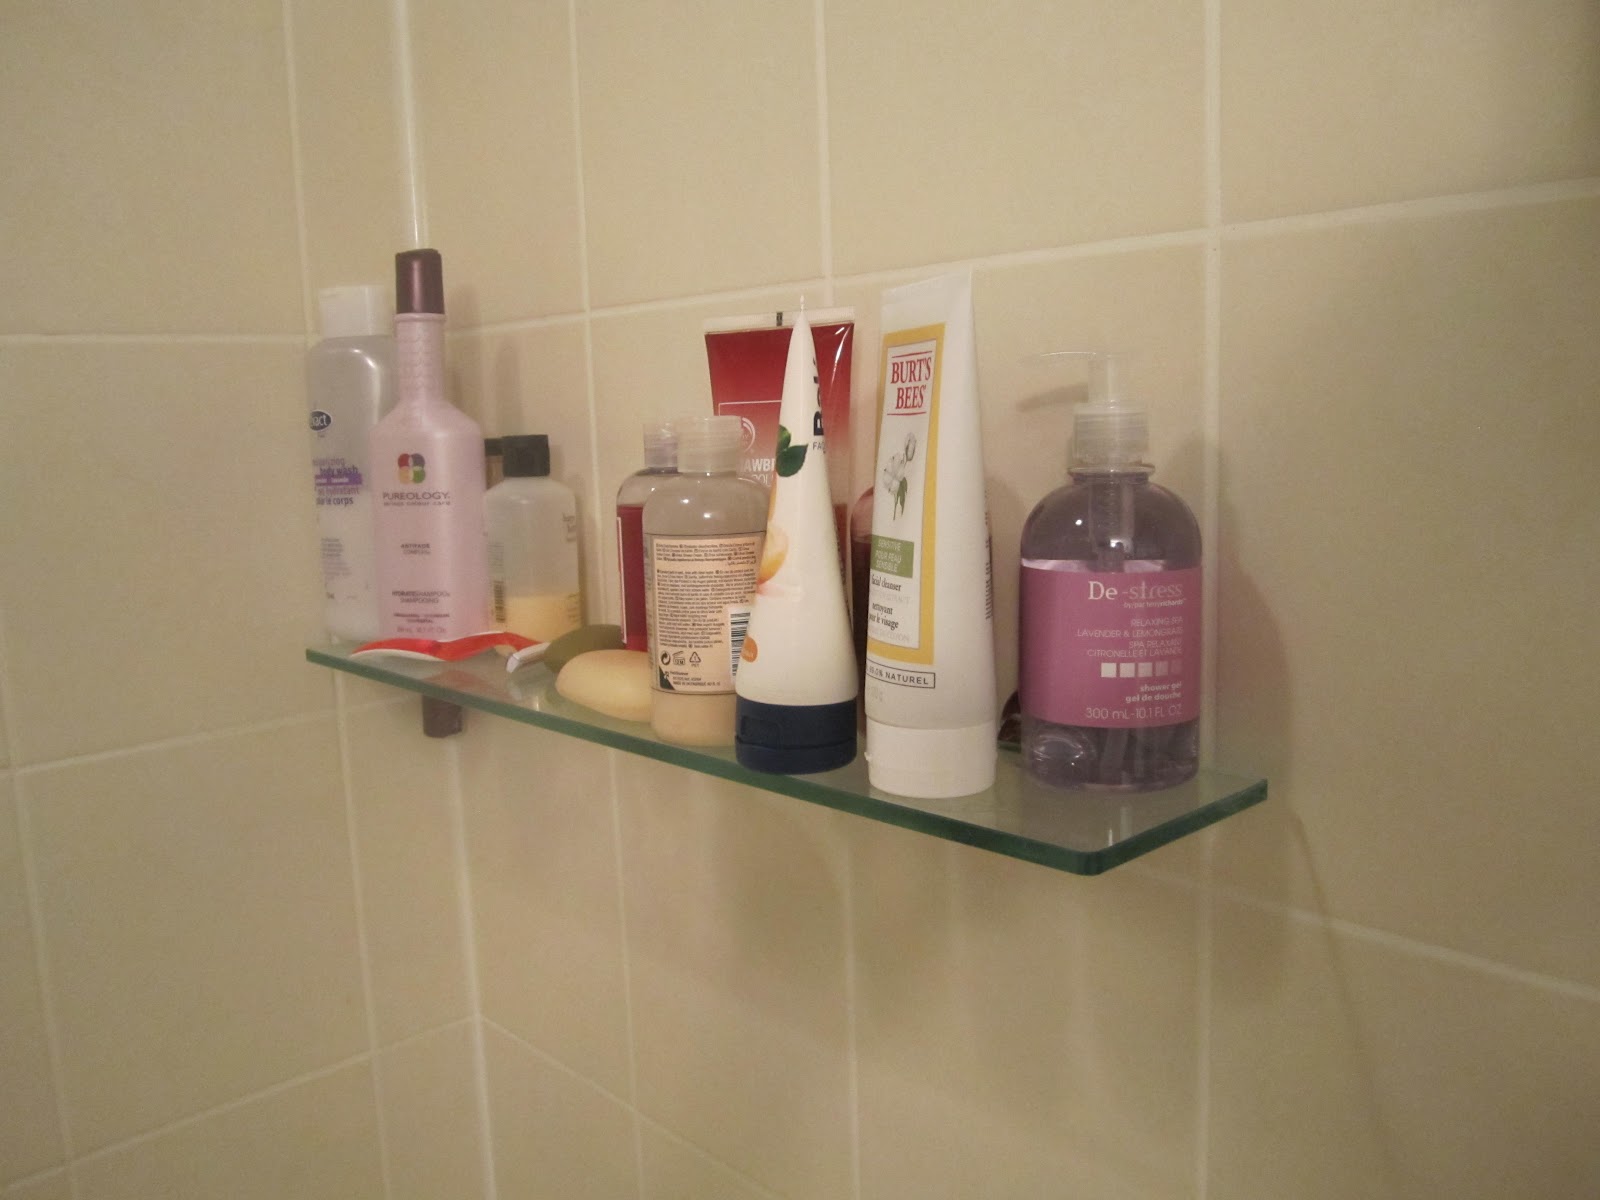 bathroom shower caddy shower. No cheap shower caddy for me- it's all class in the bathroom 